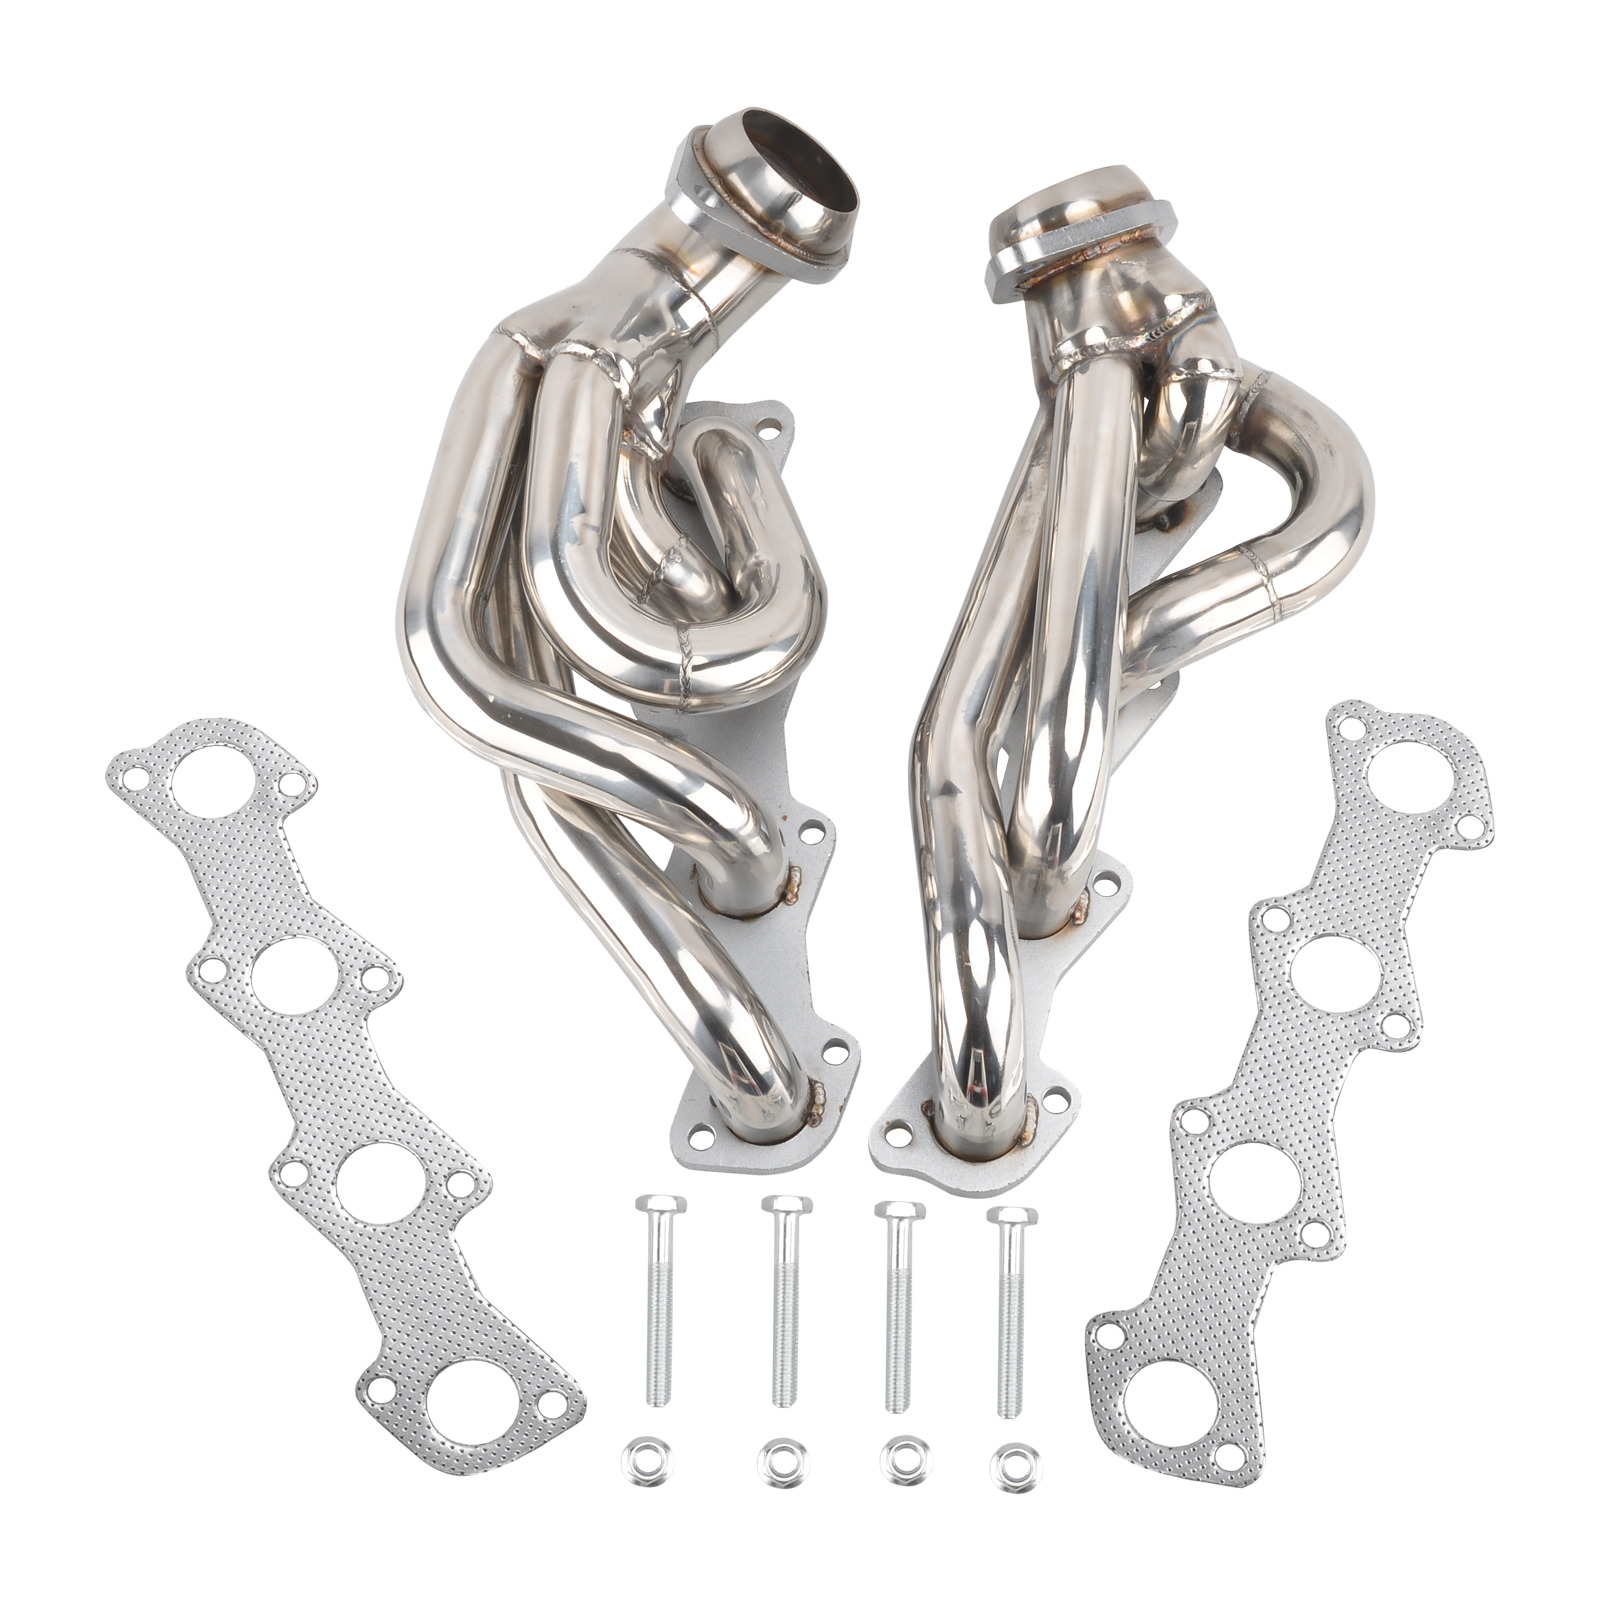 Manifold Headers Fit Ford F150 F350 F450 F250 Expedition 97-03 5.4L V8 Shorty